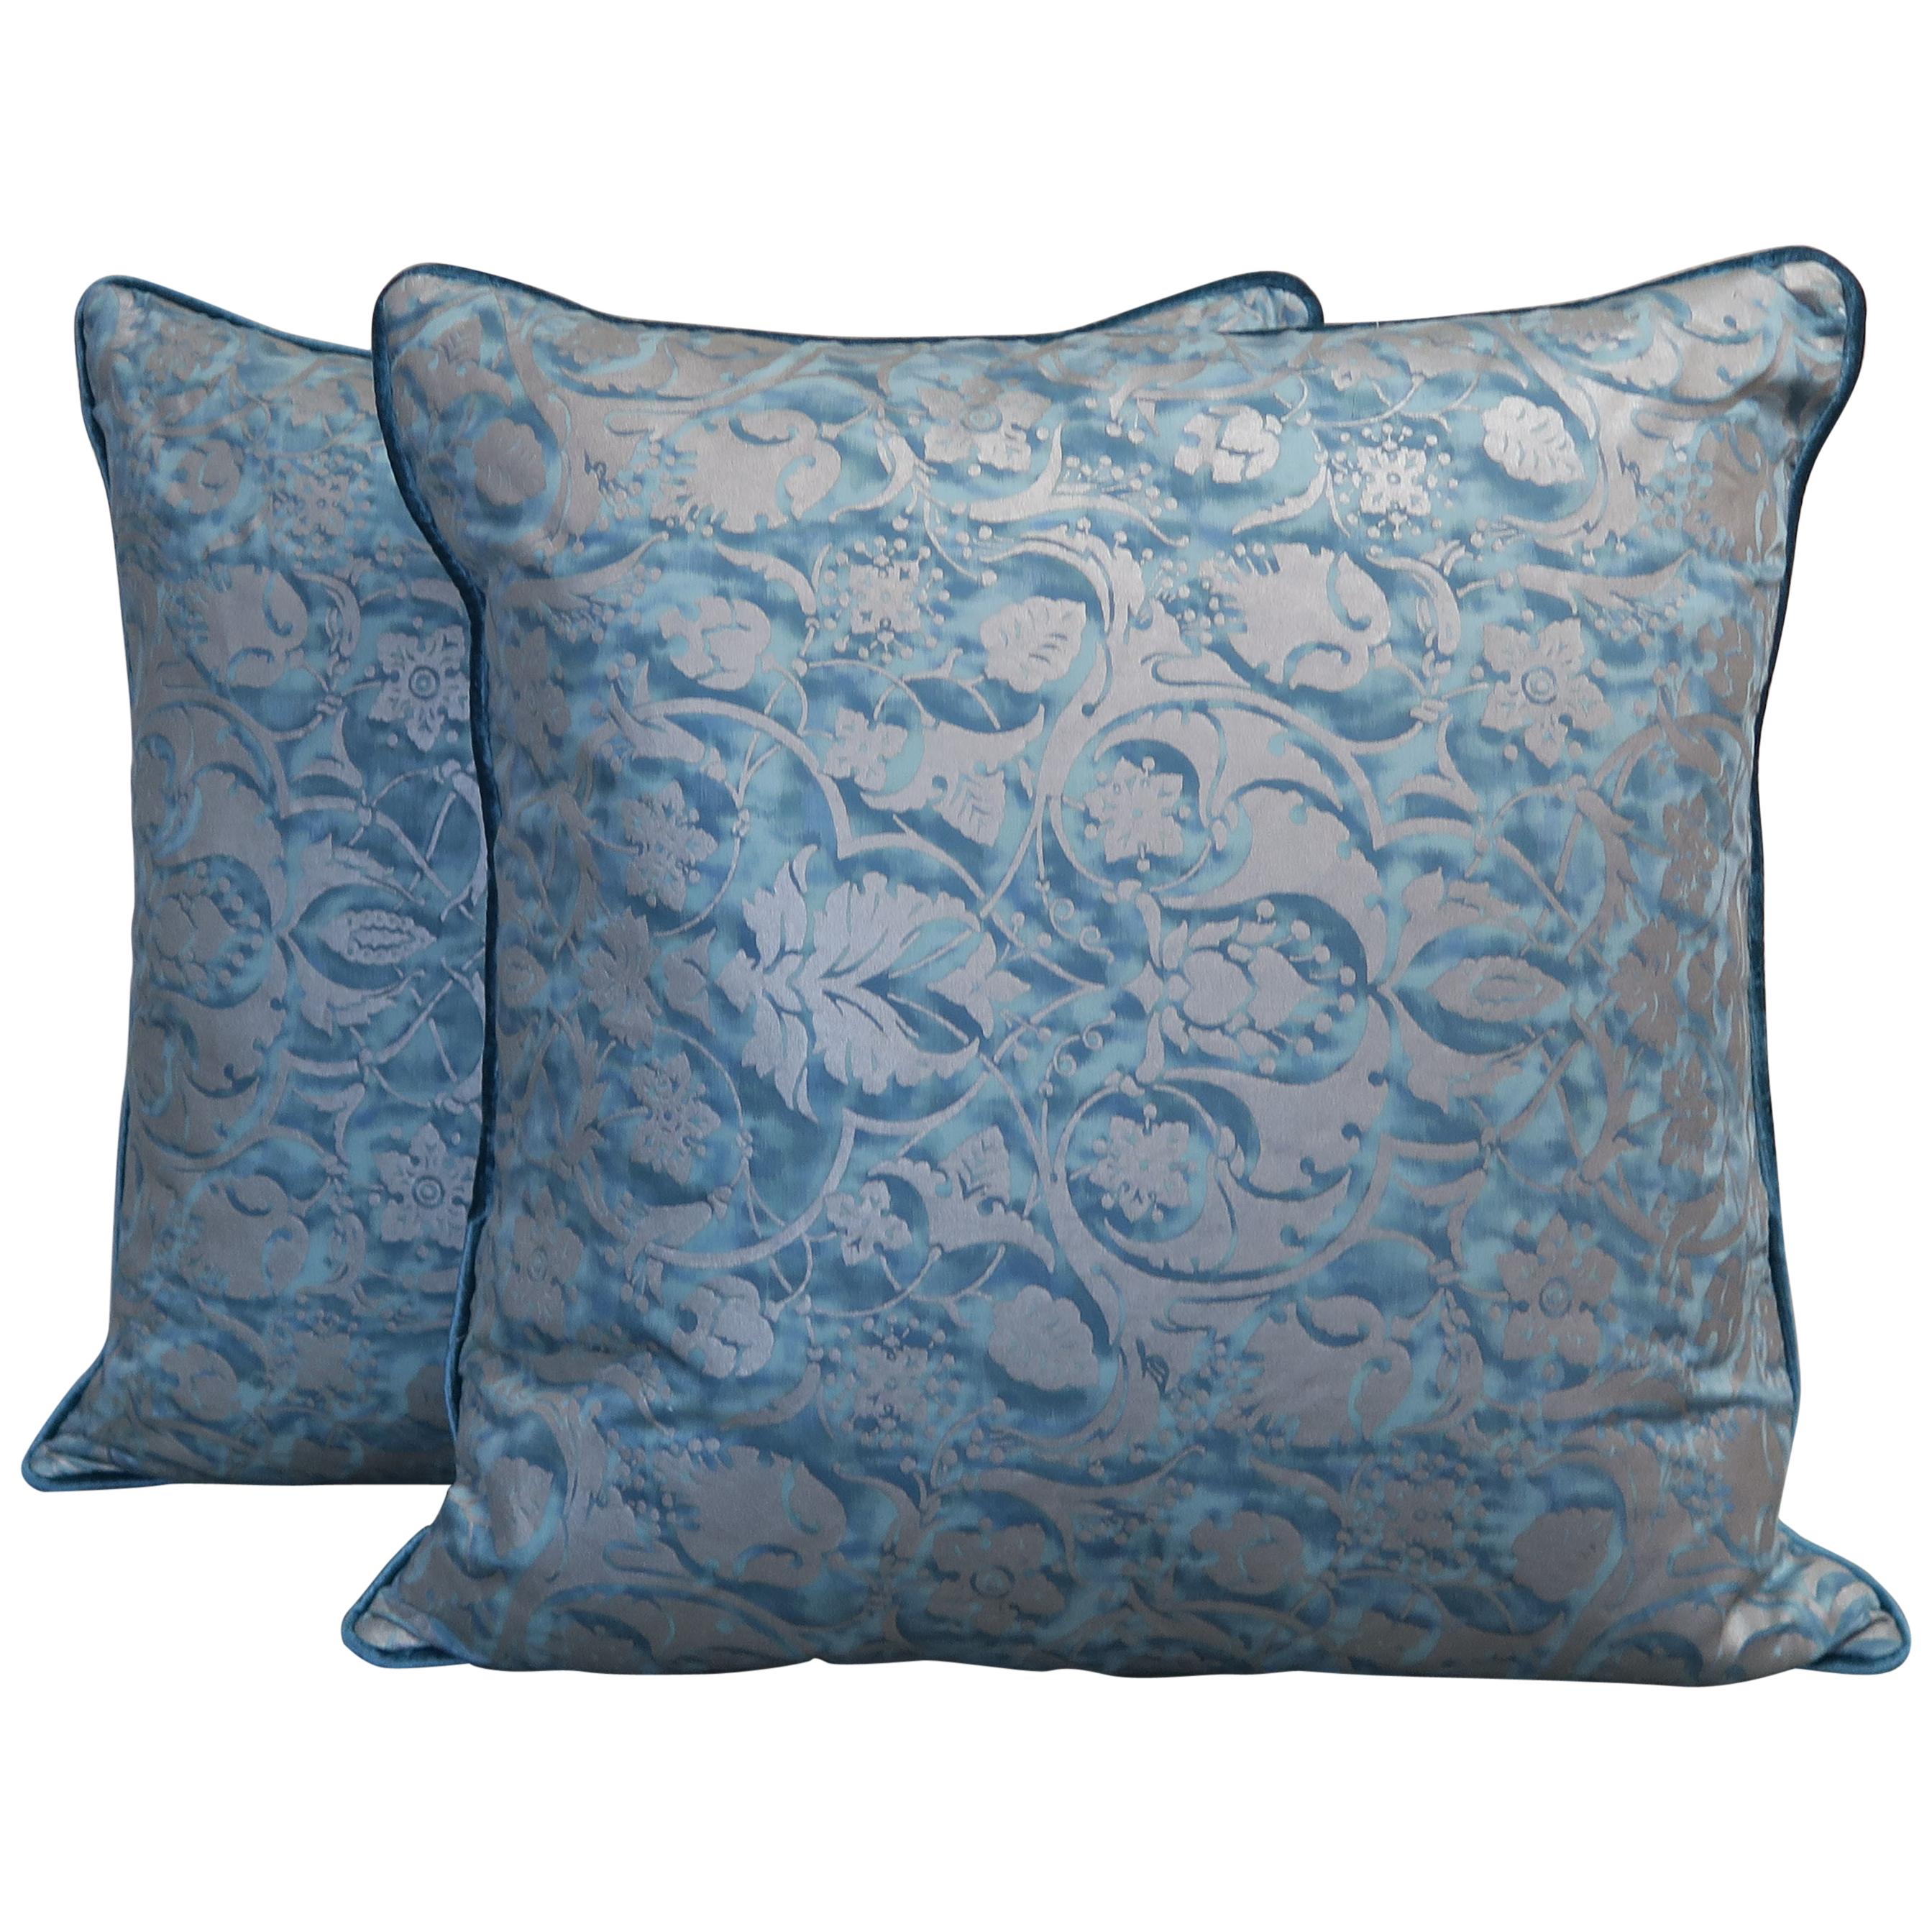 Pair of Square Fortuny Pillows